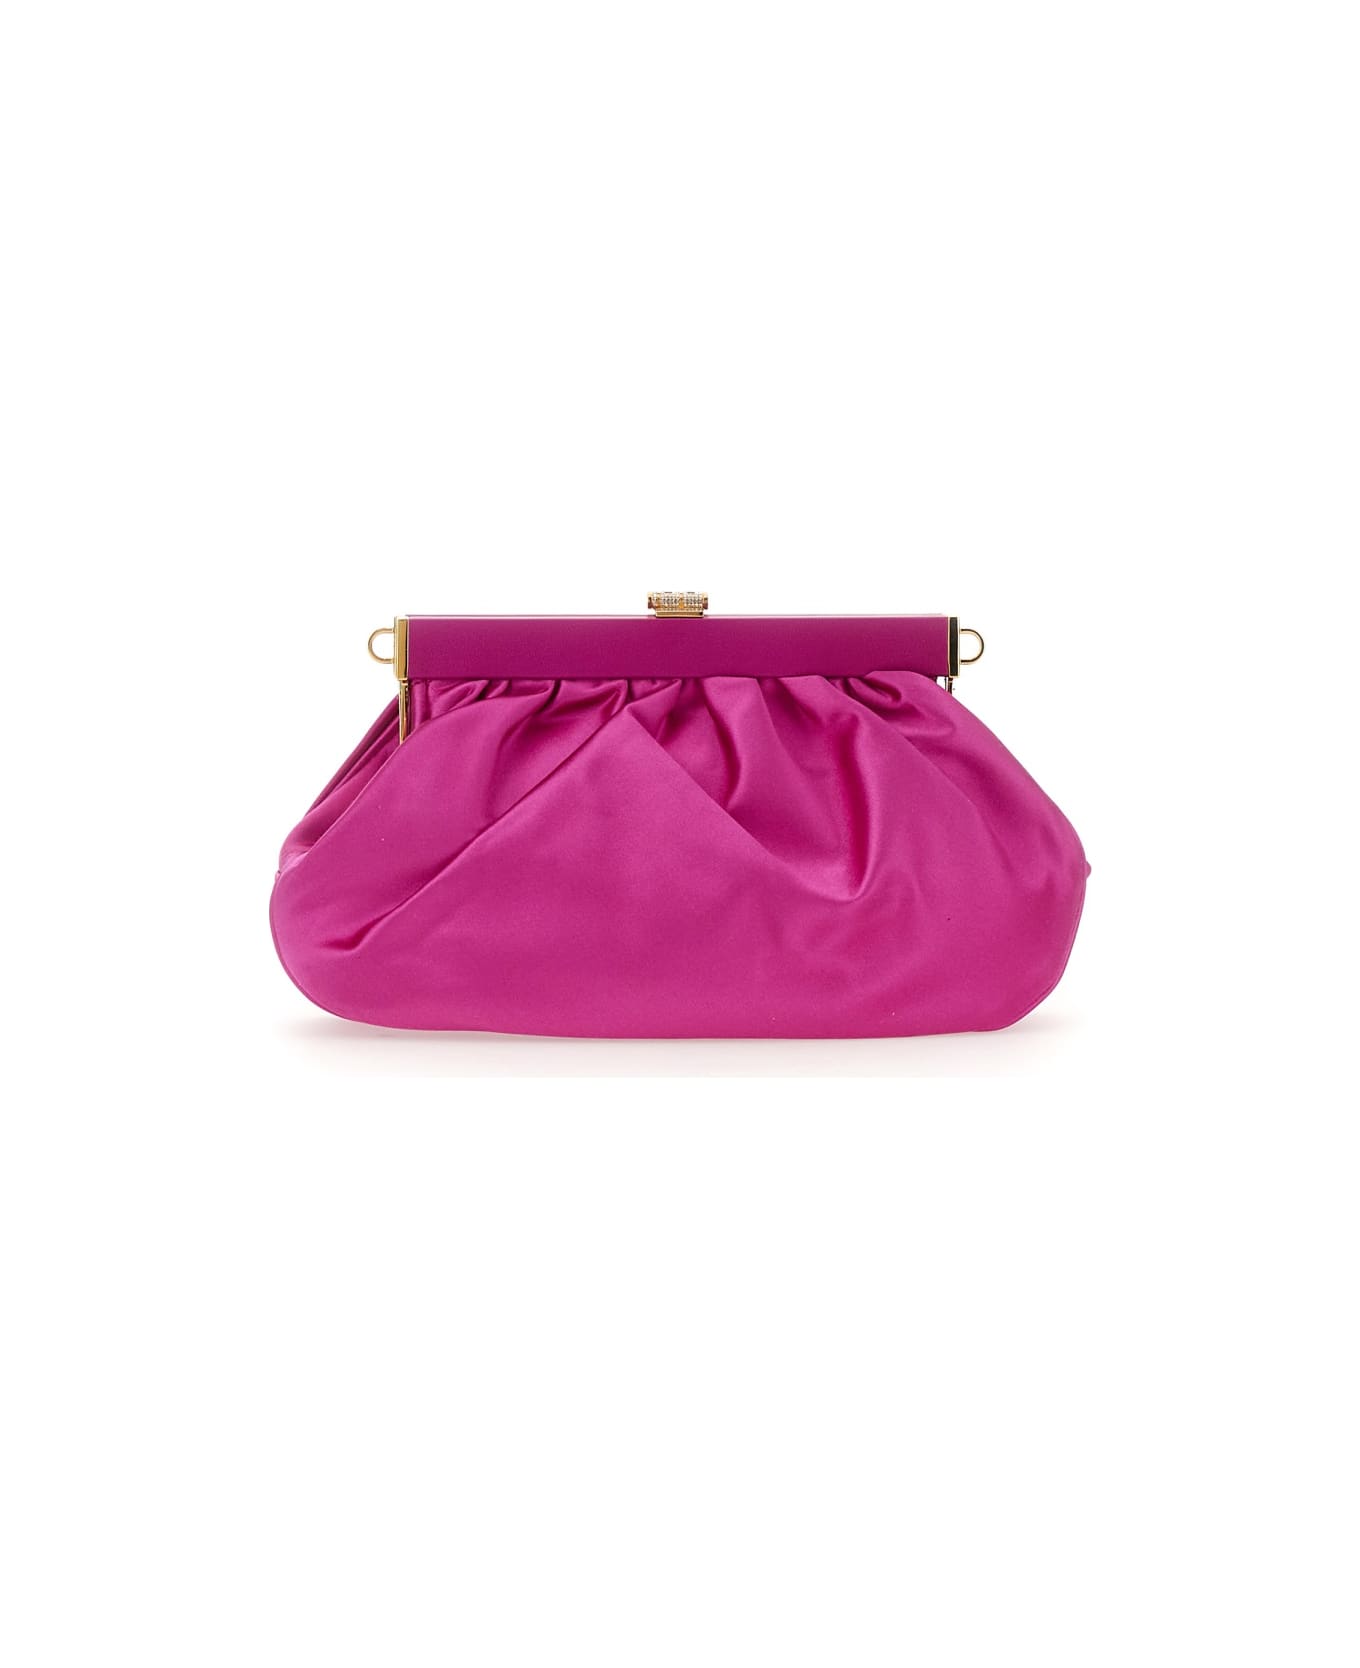 Versace Clutch With Medusa Plaque - FUCHSIA クラッチバッグ